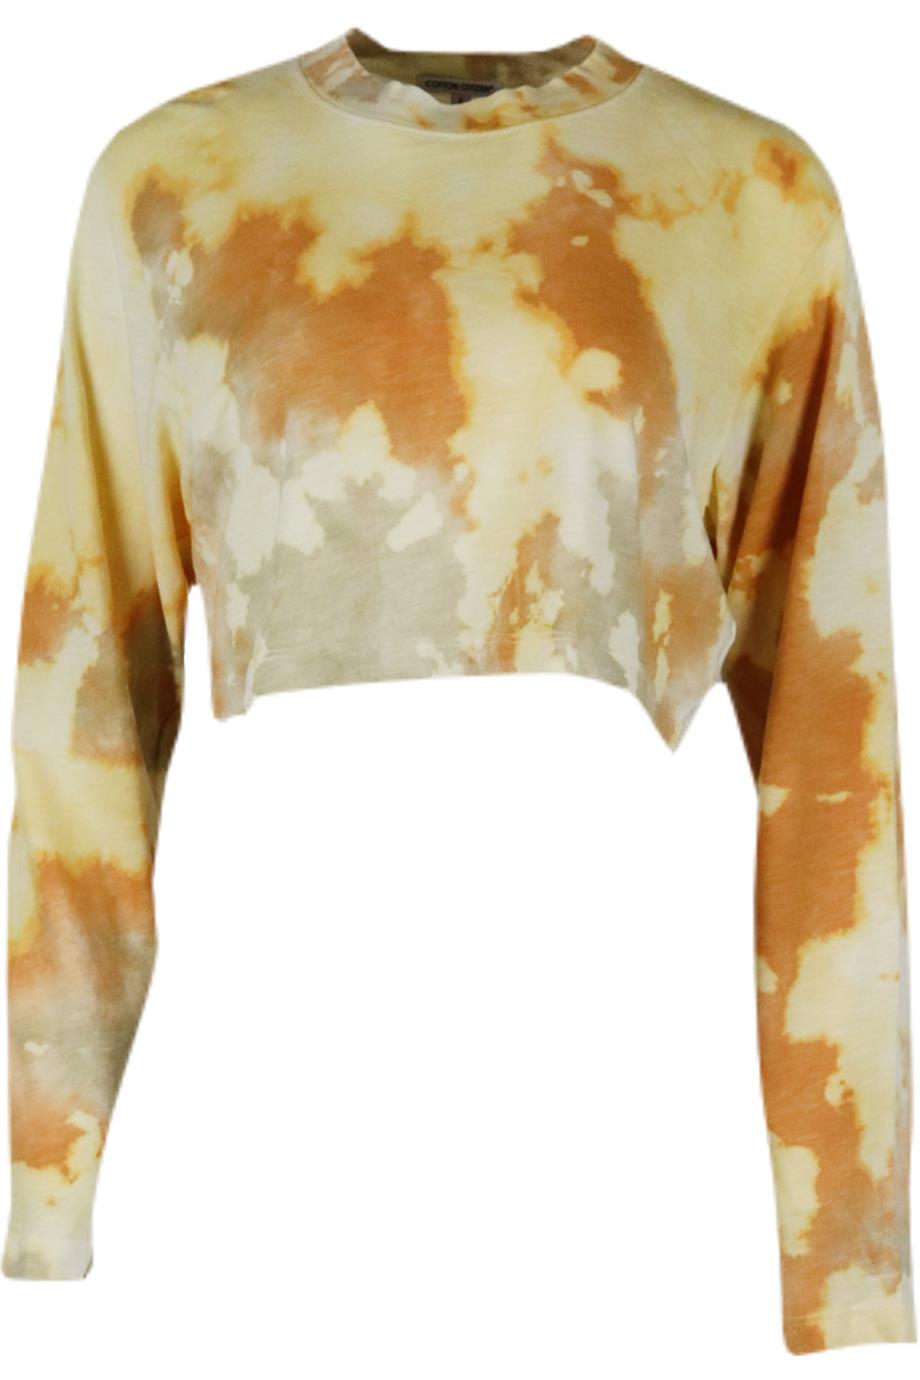 COTTON CITIZEN CROPPED TIE DYED COTTON TOP SMALL